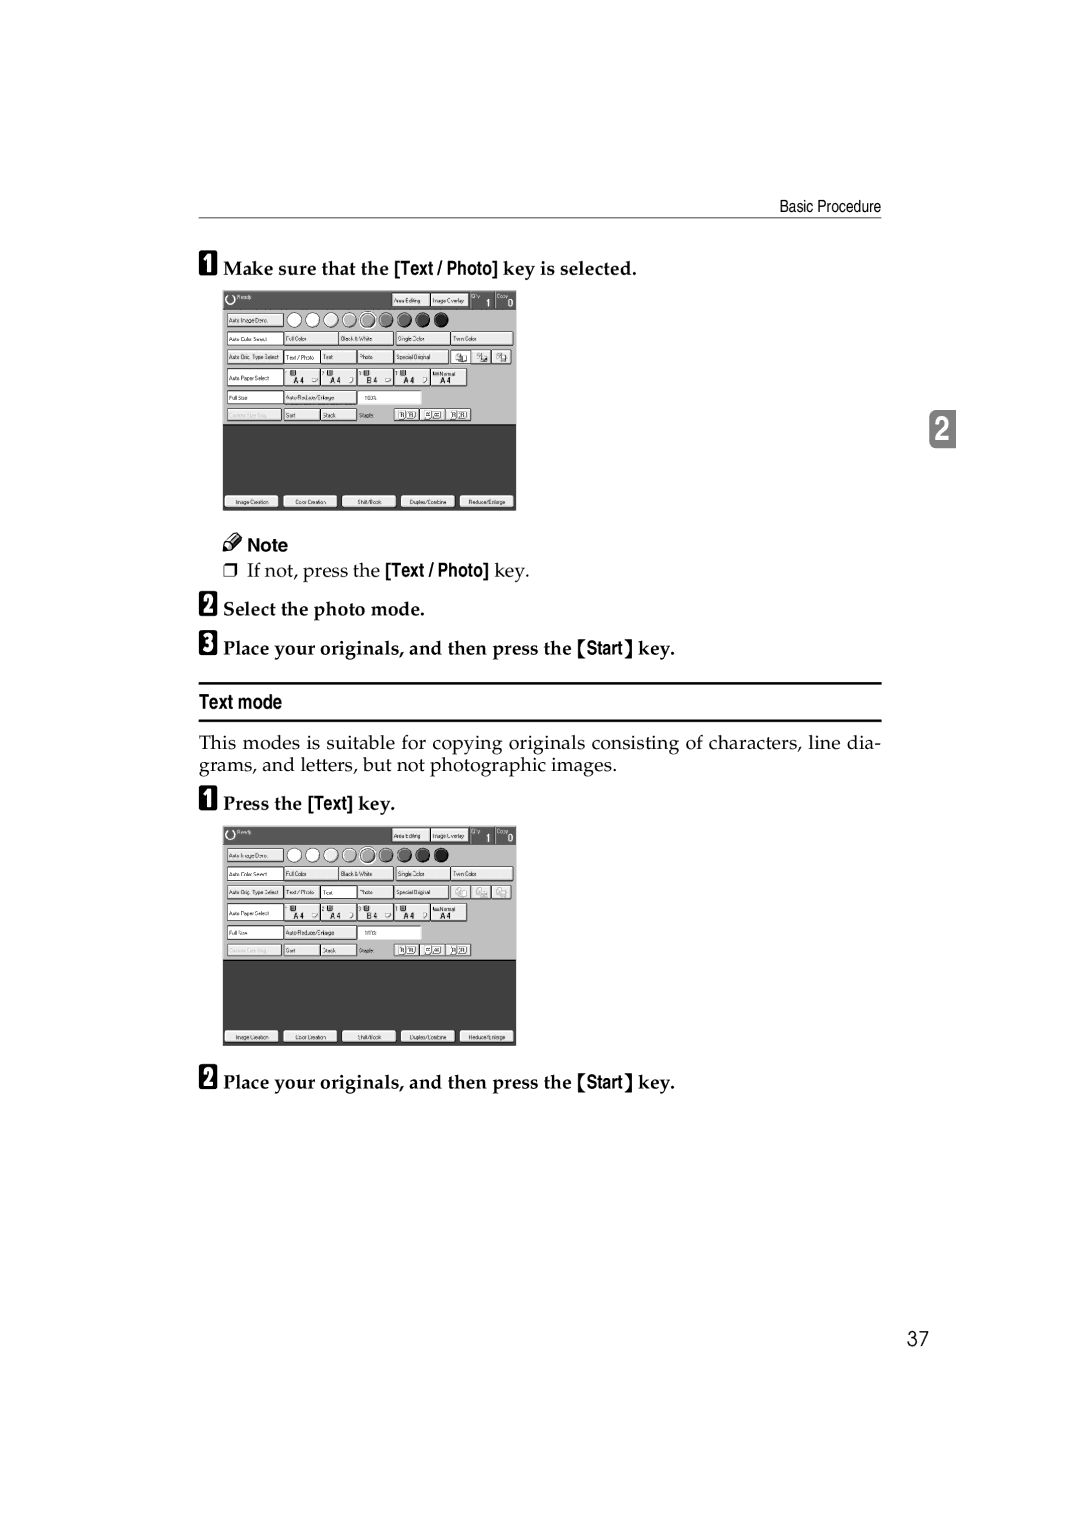 Ricoh 6513 manual Text mode, Make sure that the Text / Photo key is selected 